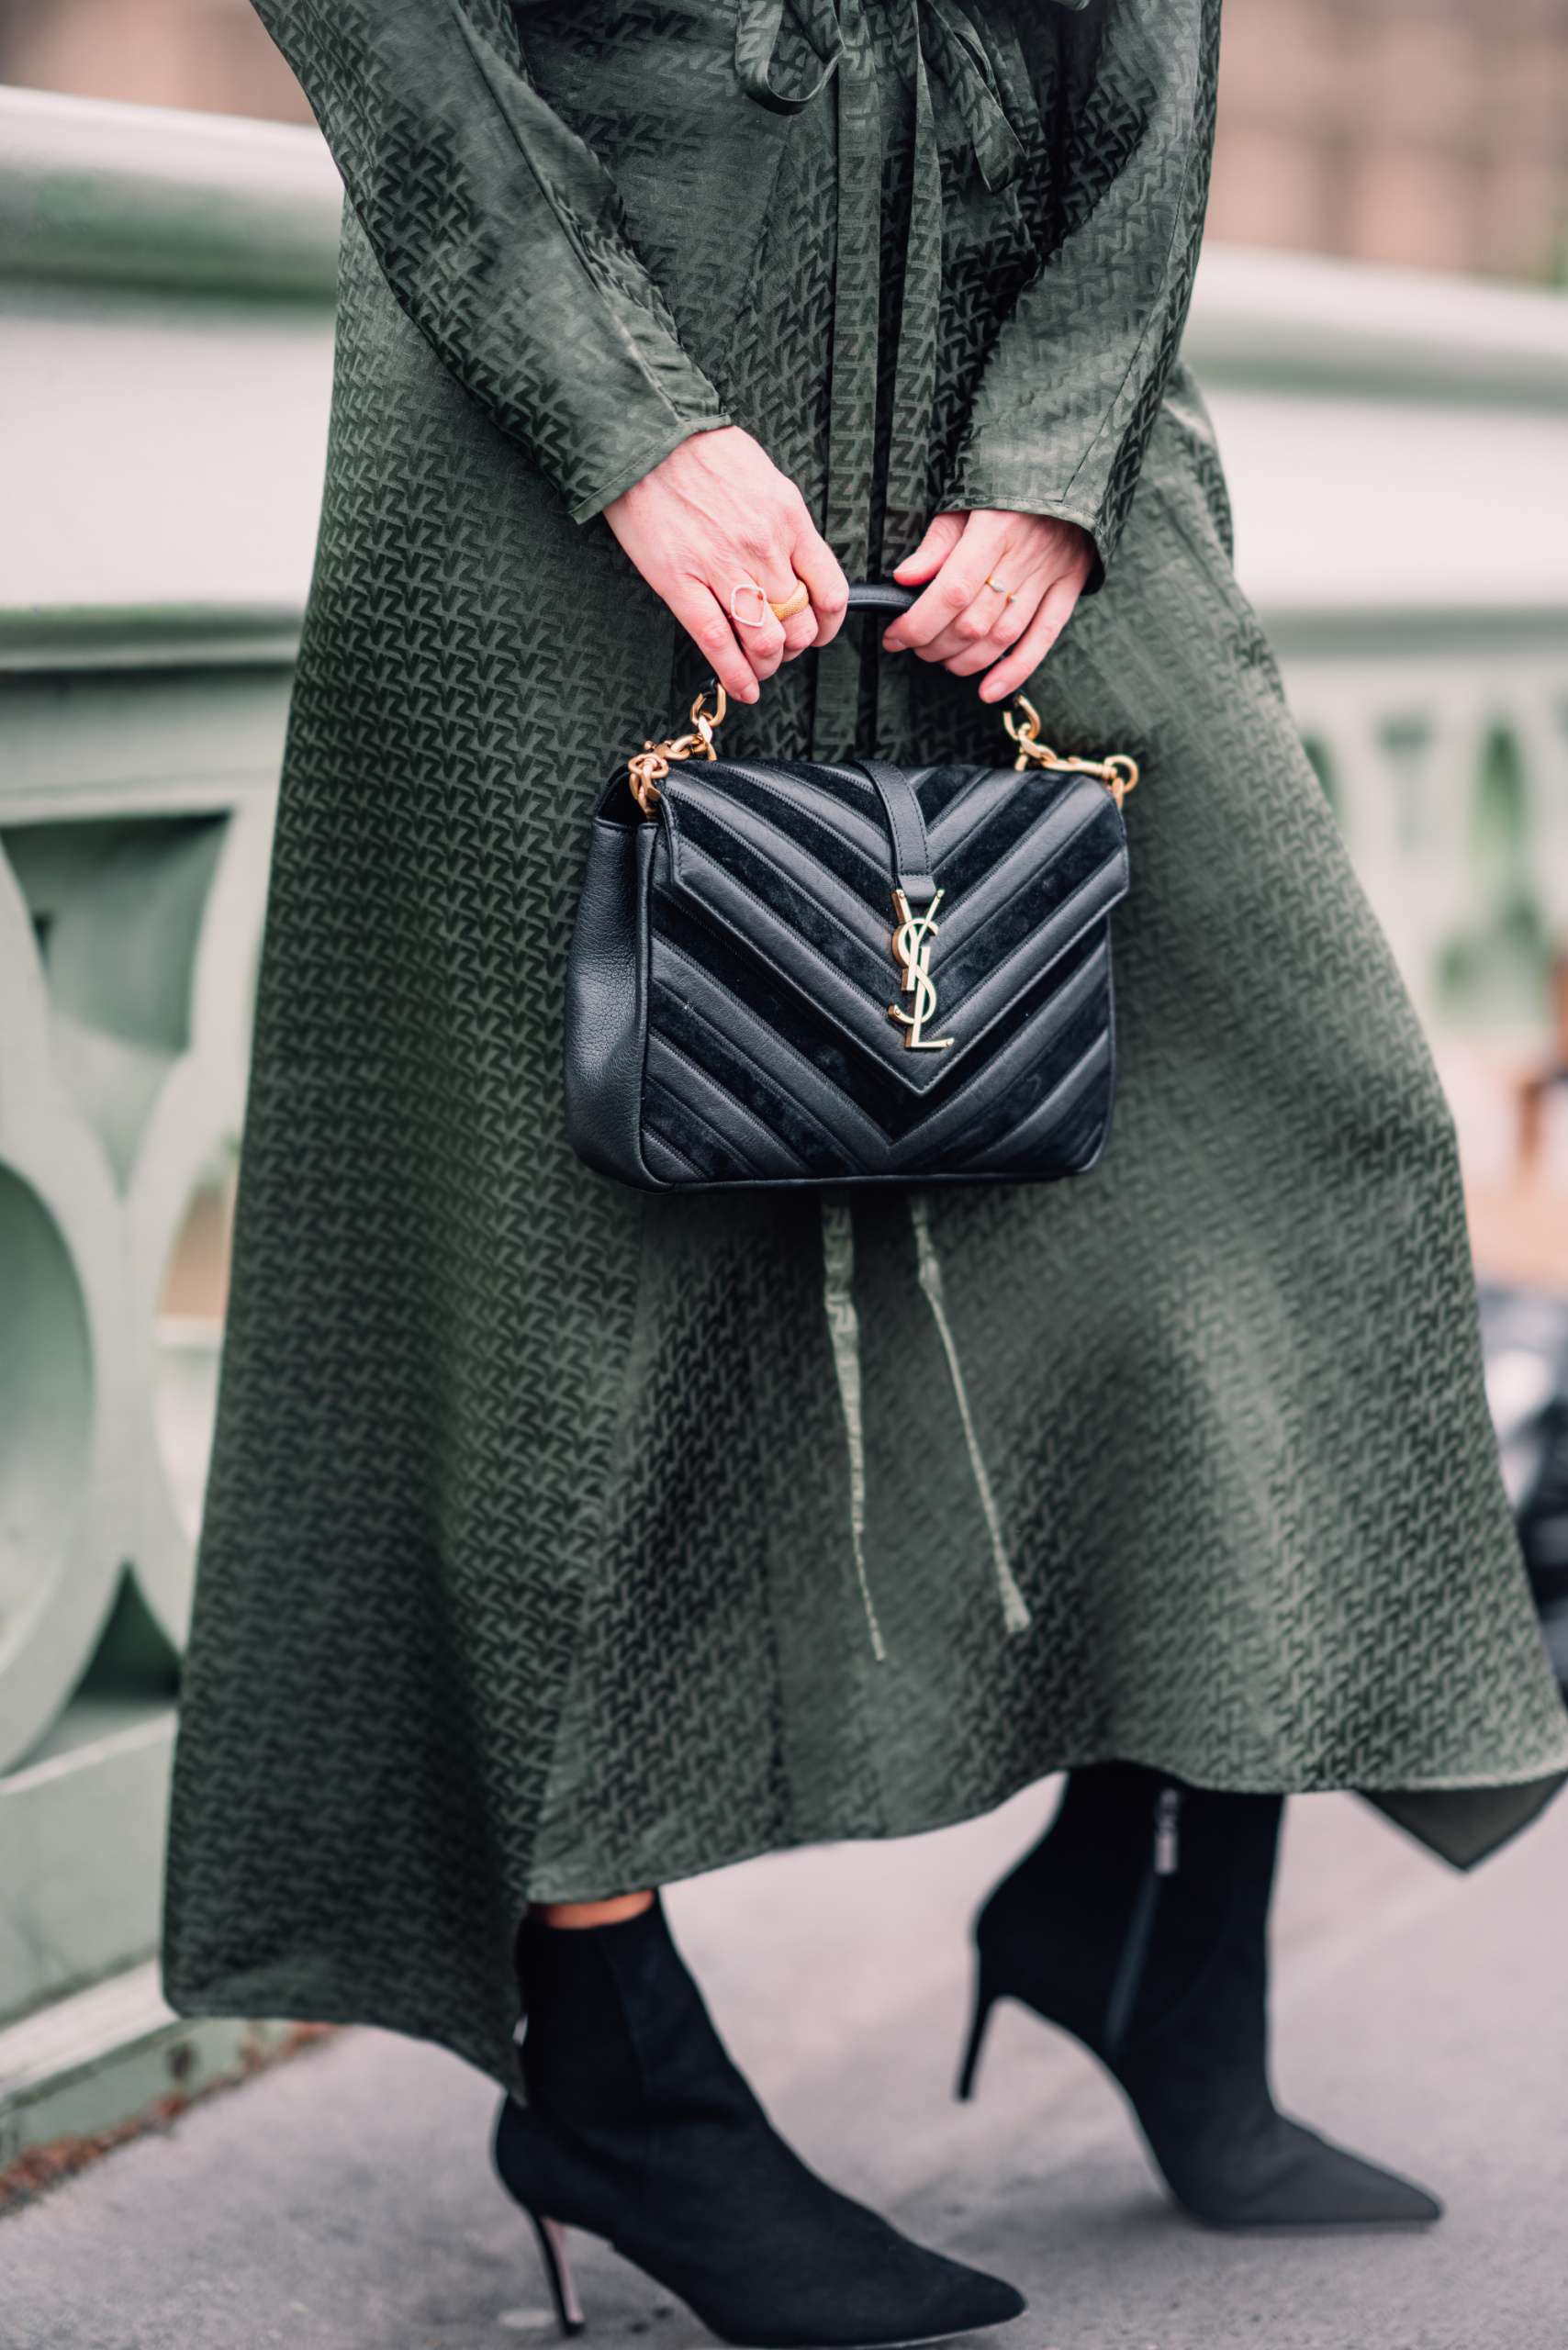 olive green, fall fashion, fall trends, coor trend, army green, erin busbee, zadig & voltaire olive green dress, schutz bette booties, ysl chevron handbag, london, england, fall wedding guest dress, olive green dress, olive green fashion finds